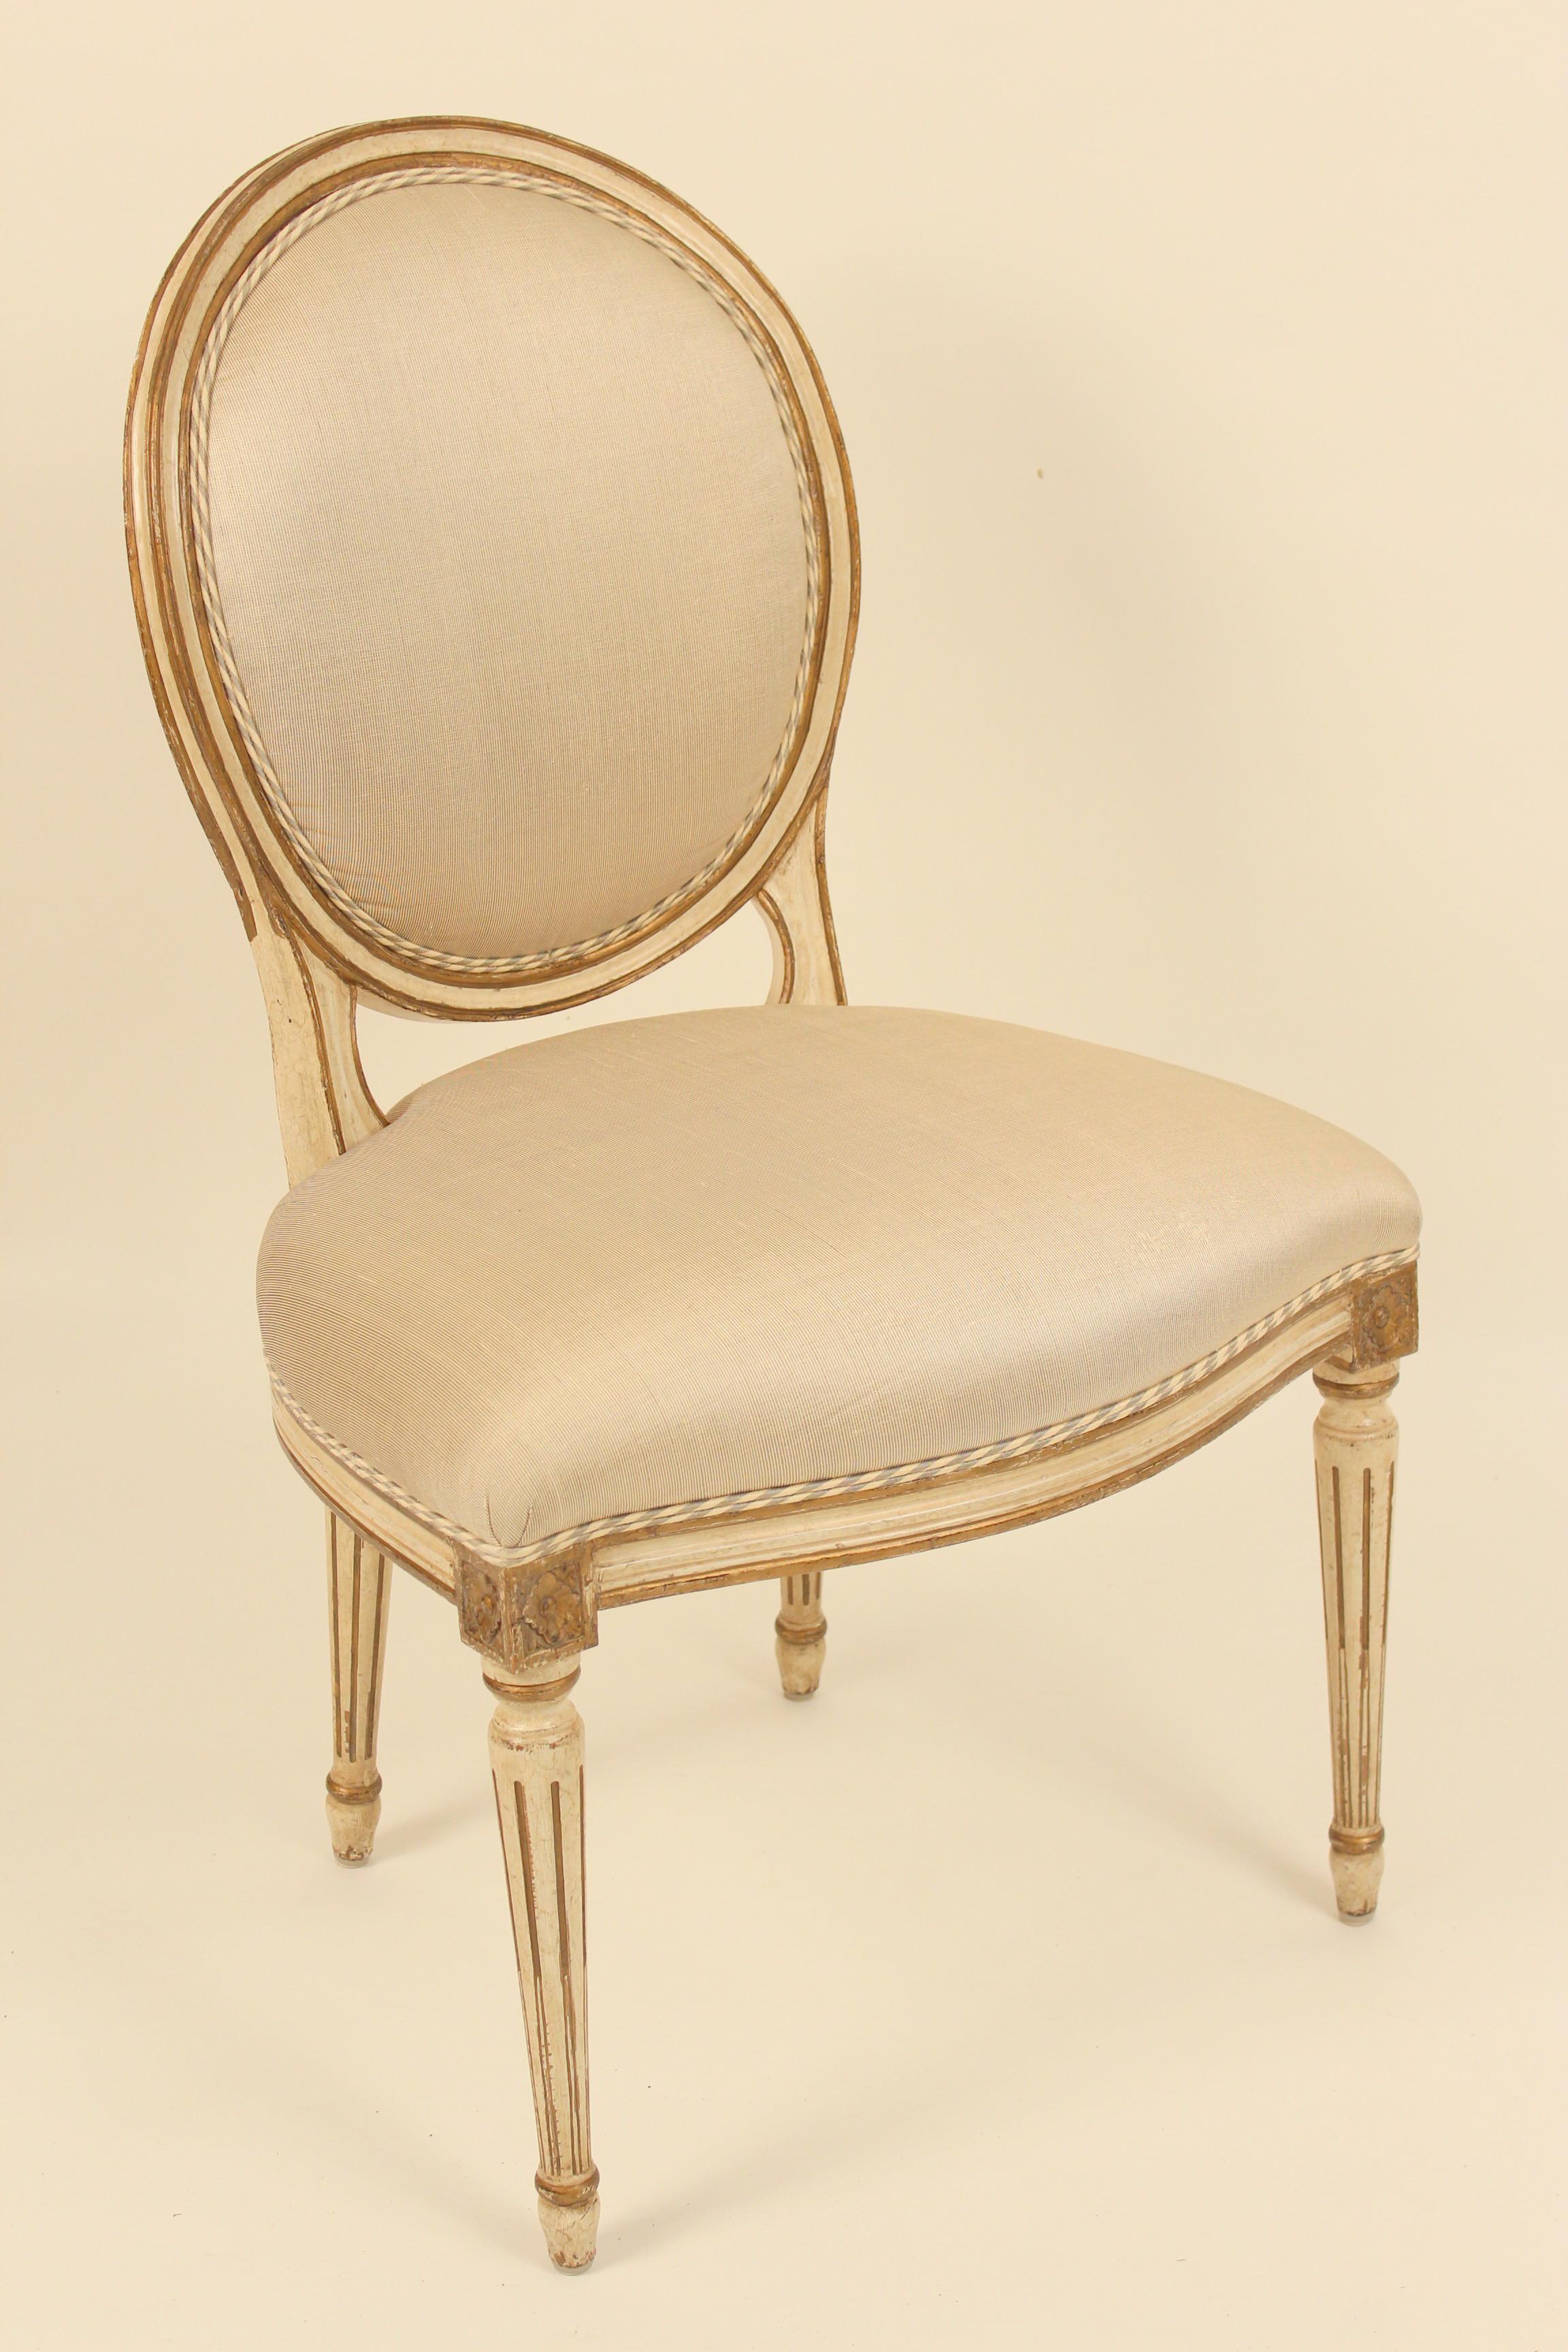 Set of 6 painted and gilt decorated Louis XVI style dining room chairs, circa late 20th century. These chairs are decorative as well as comfortable, they have a deep wide seats. The upholstery needs to be replaced.